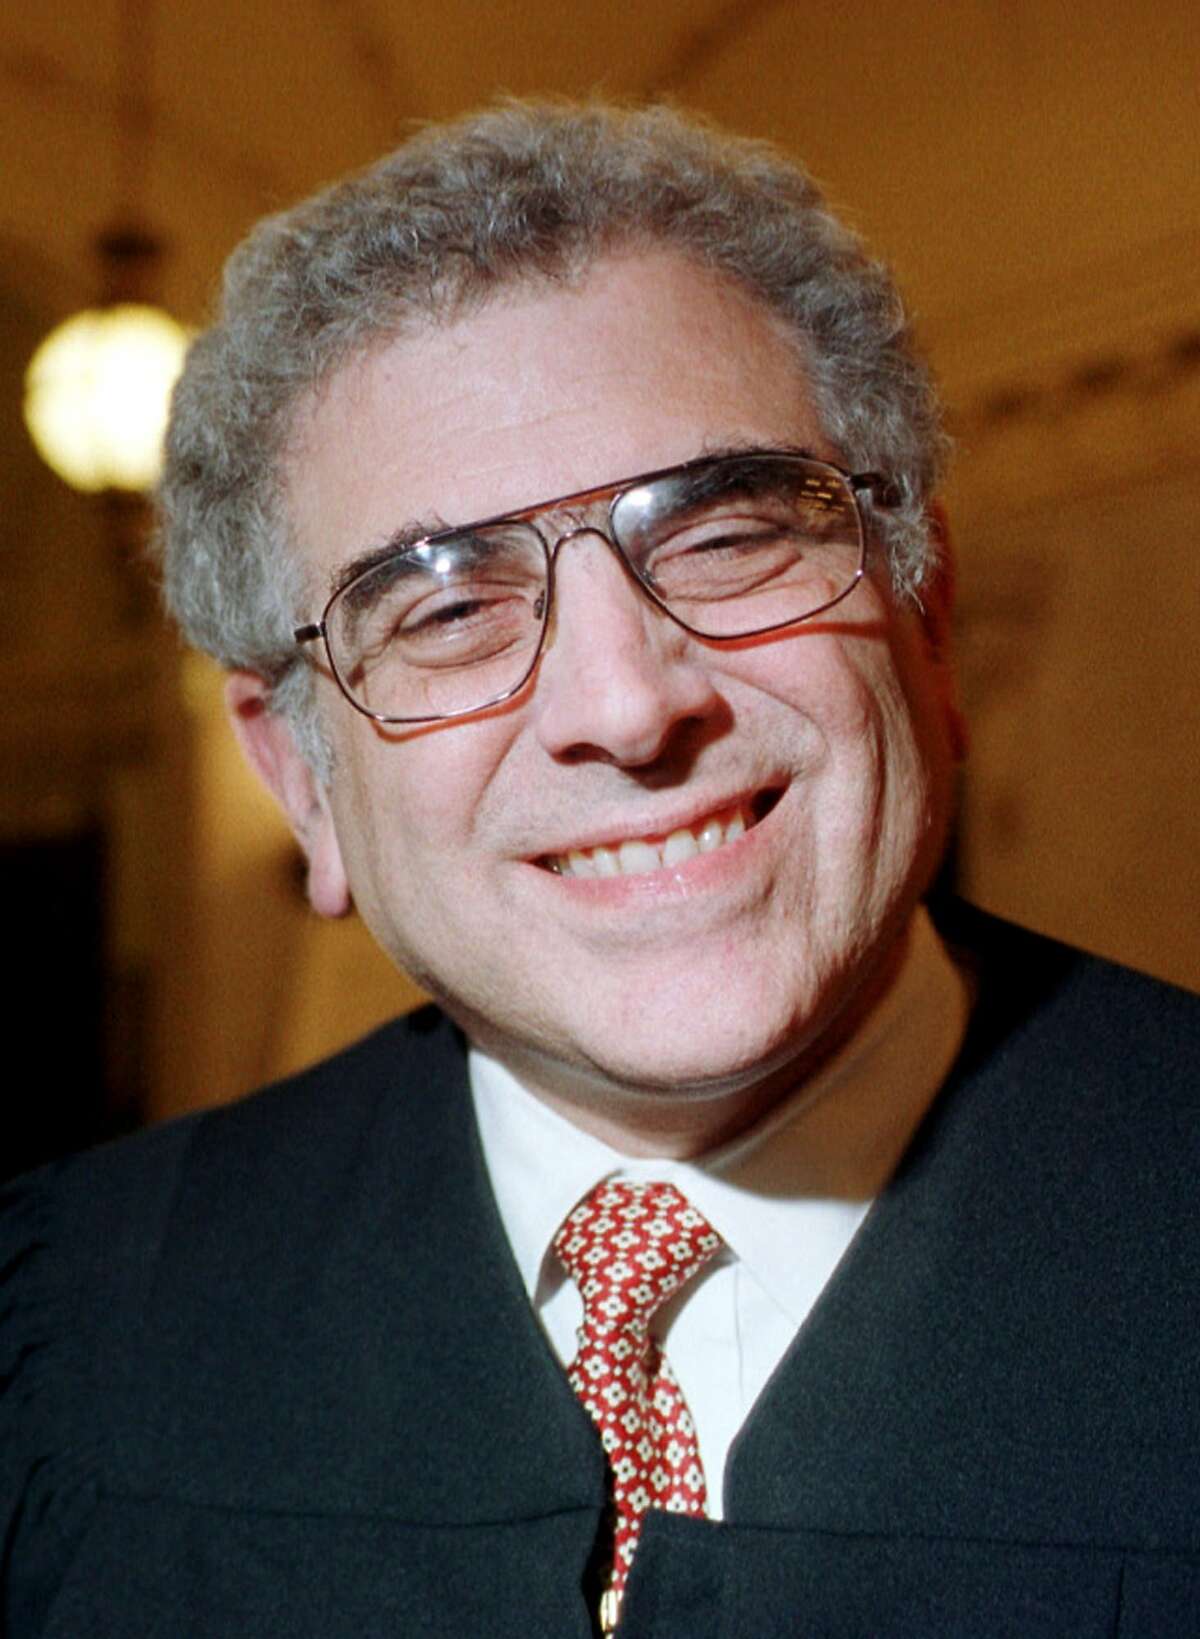 ** FILE ** Judge Andrew J. Kleinfeld of the 9th U.S. Circuit Court of Appeals is shown in a 2000 photo. The judges will hear arguments in the case that postponed the California gubernatorial recall election. (AP Photo/The Recorder, Shelley Eades)